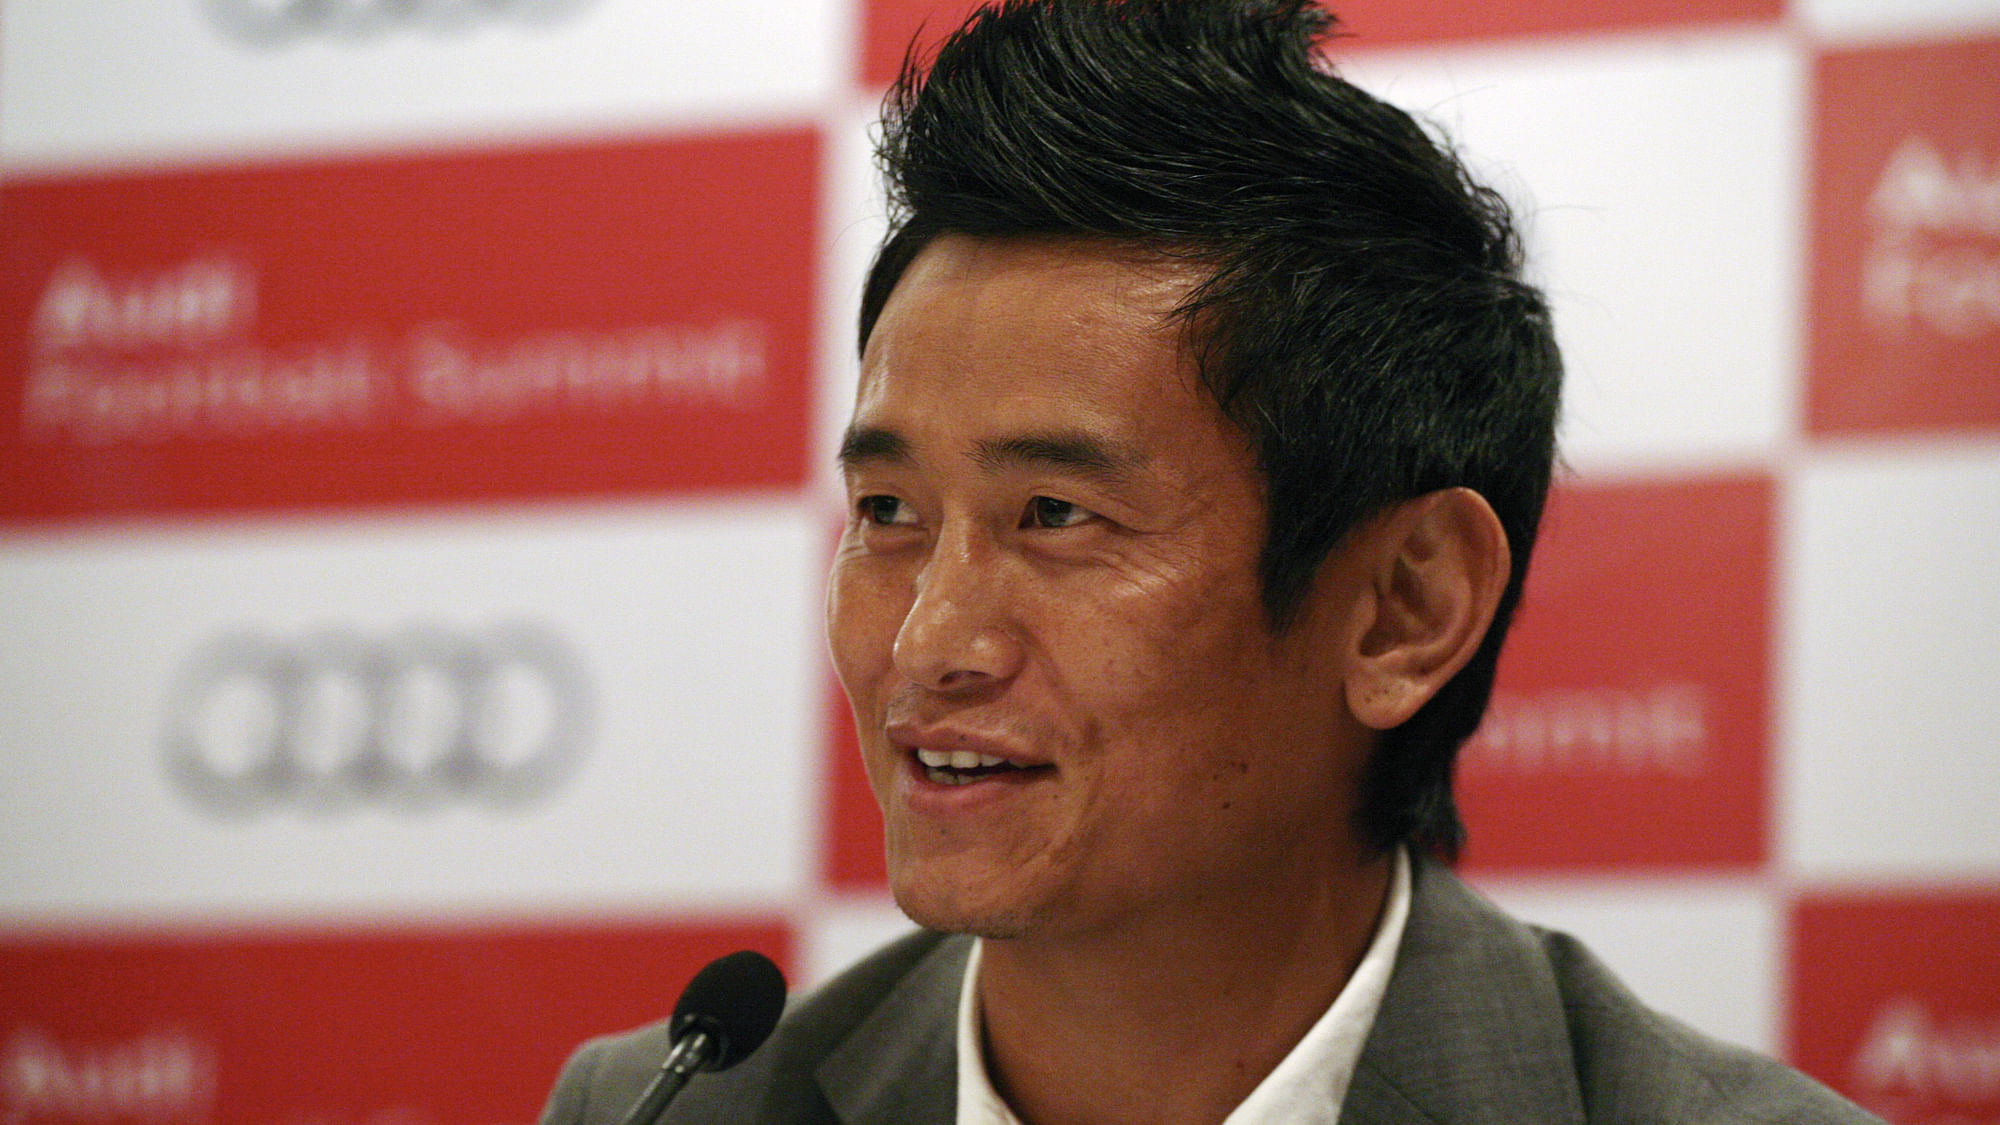 Although he earned his reputation as an East Bengal player, former India captain Bhaichung Bhutia had also played for played Mohun Bagan, scoring 25 goals in 56 matches.